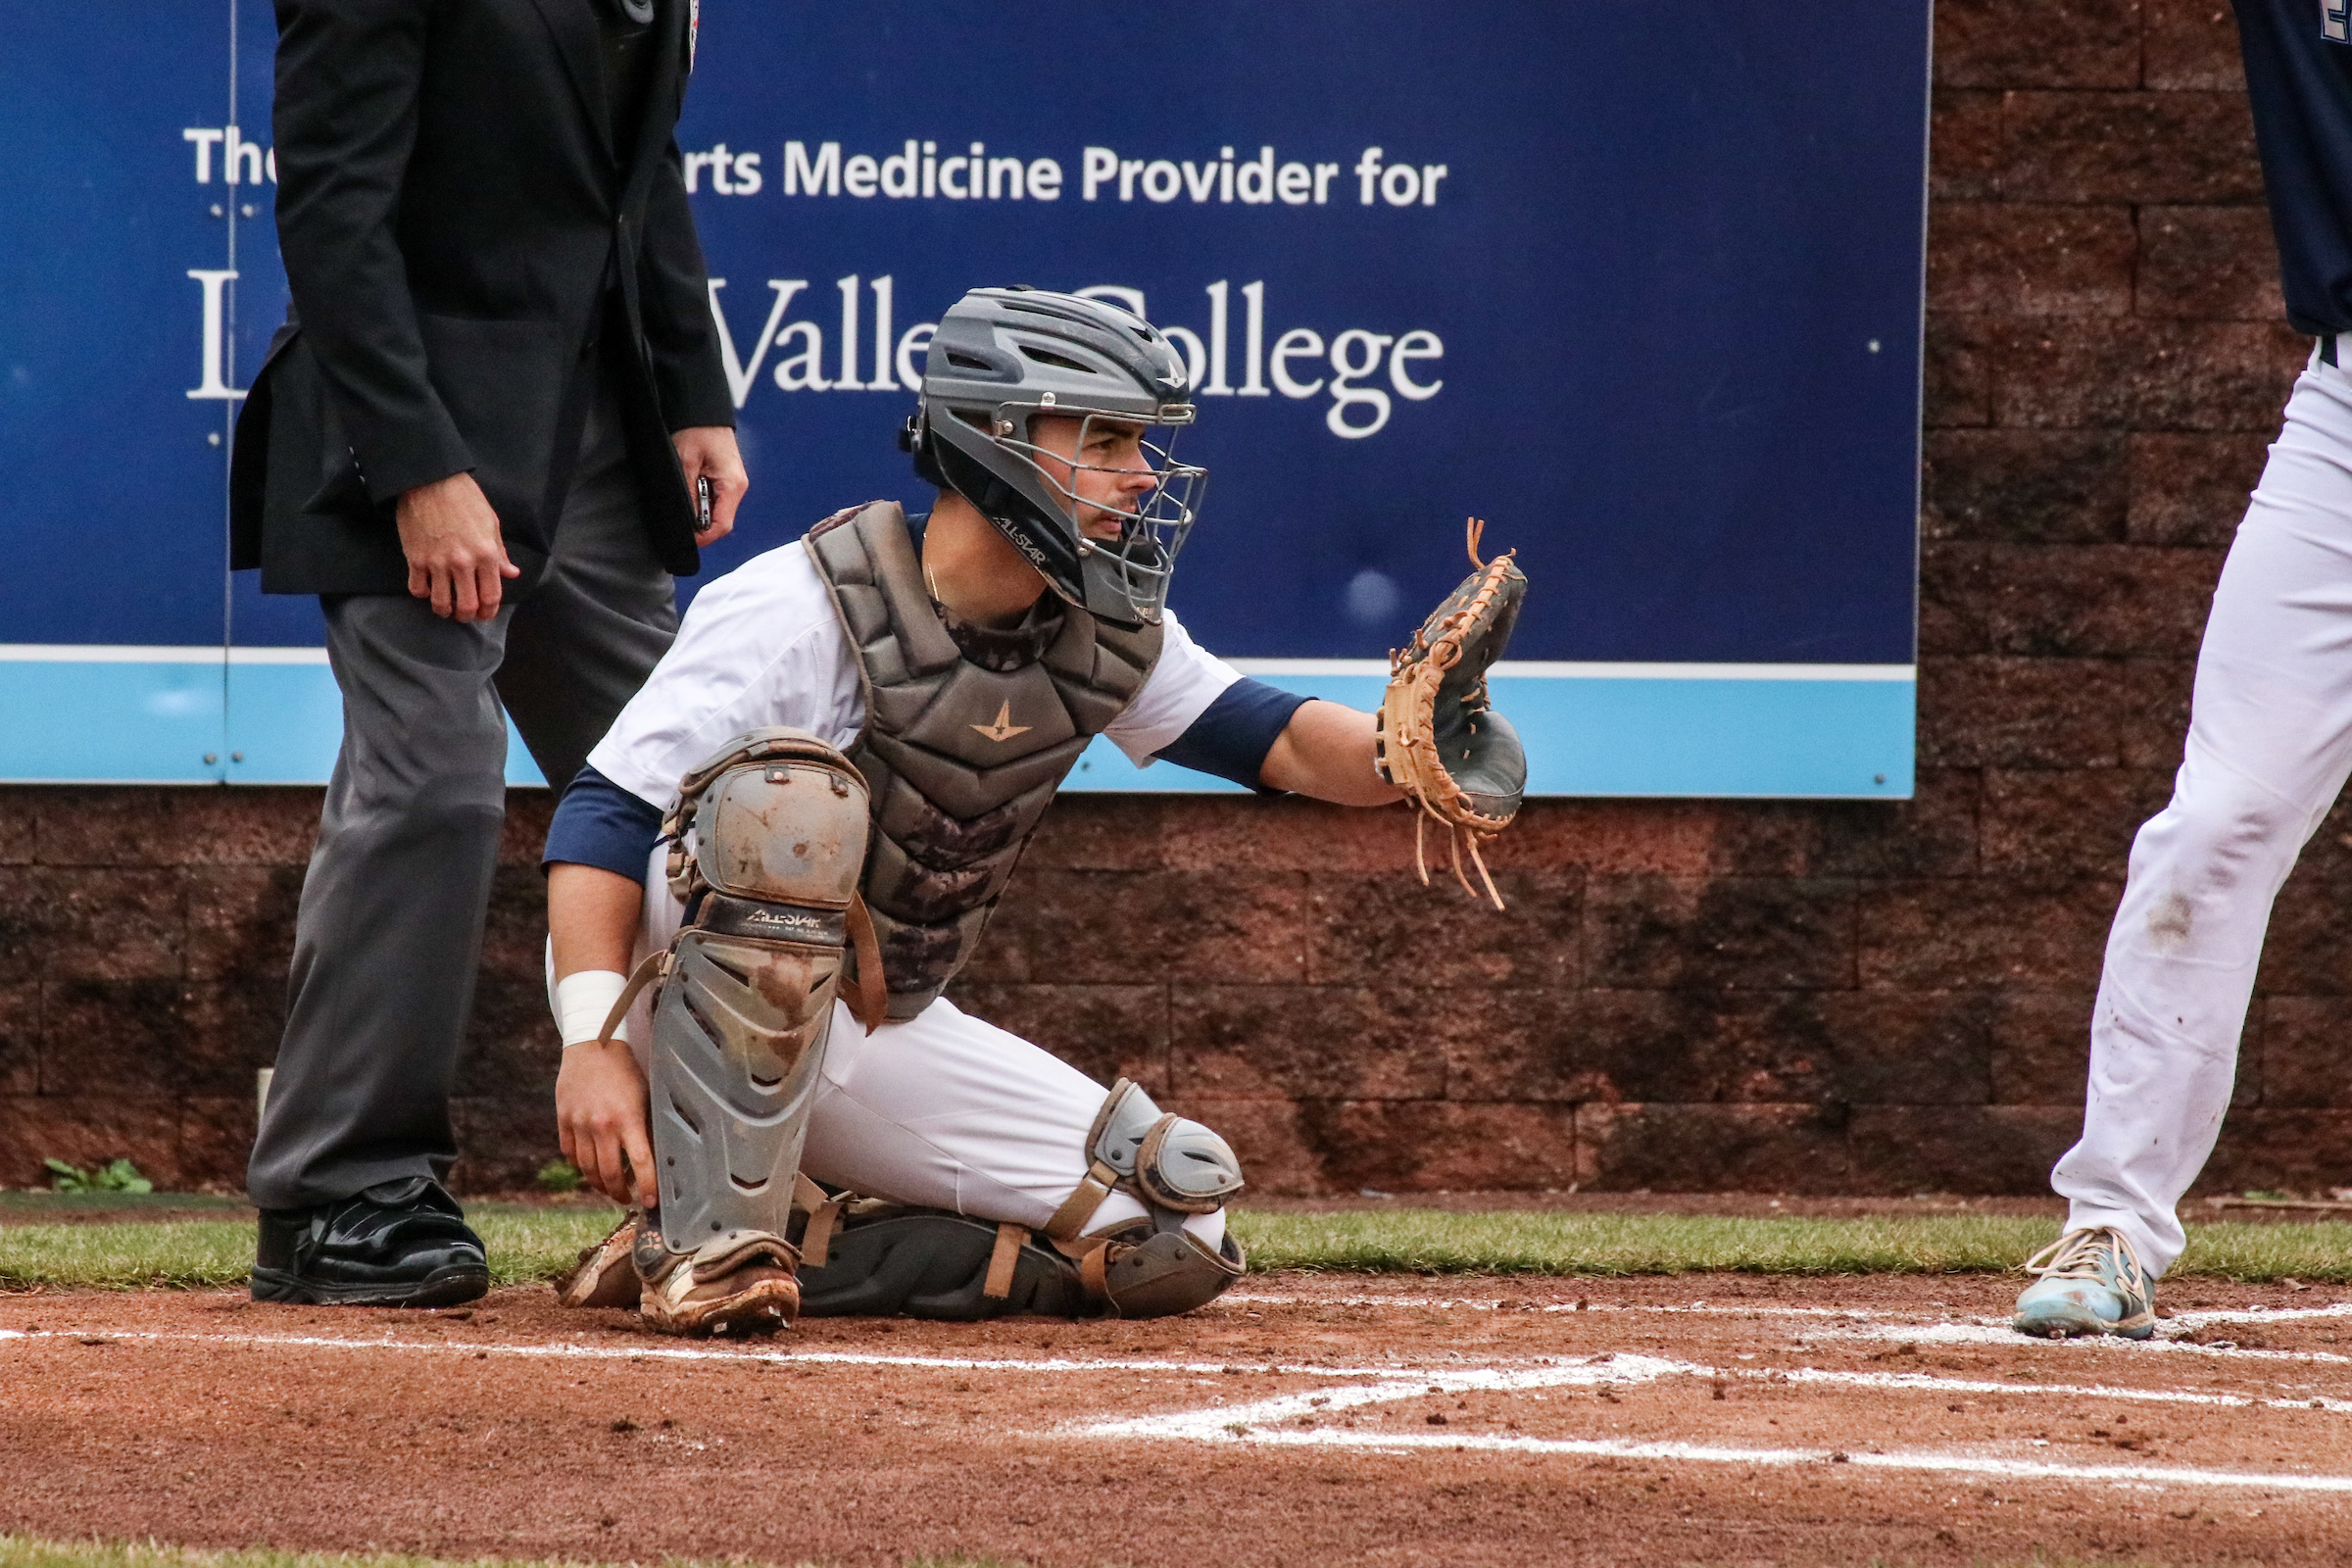 LVC baseball catcher squats behind the plate